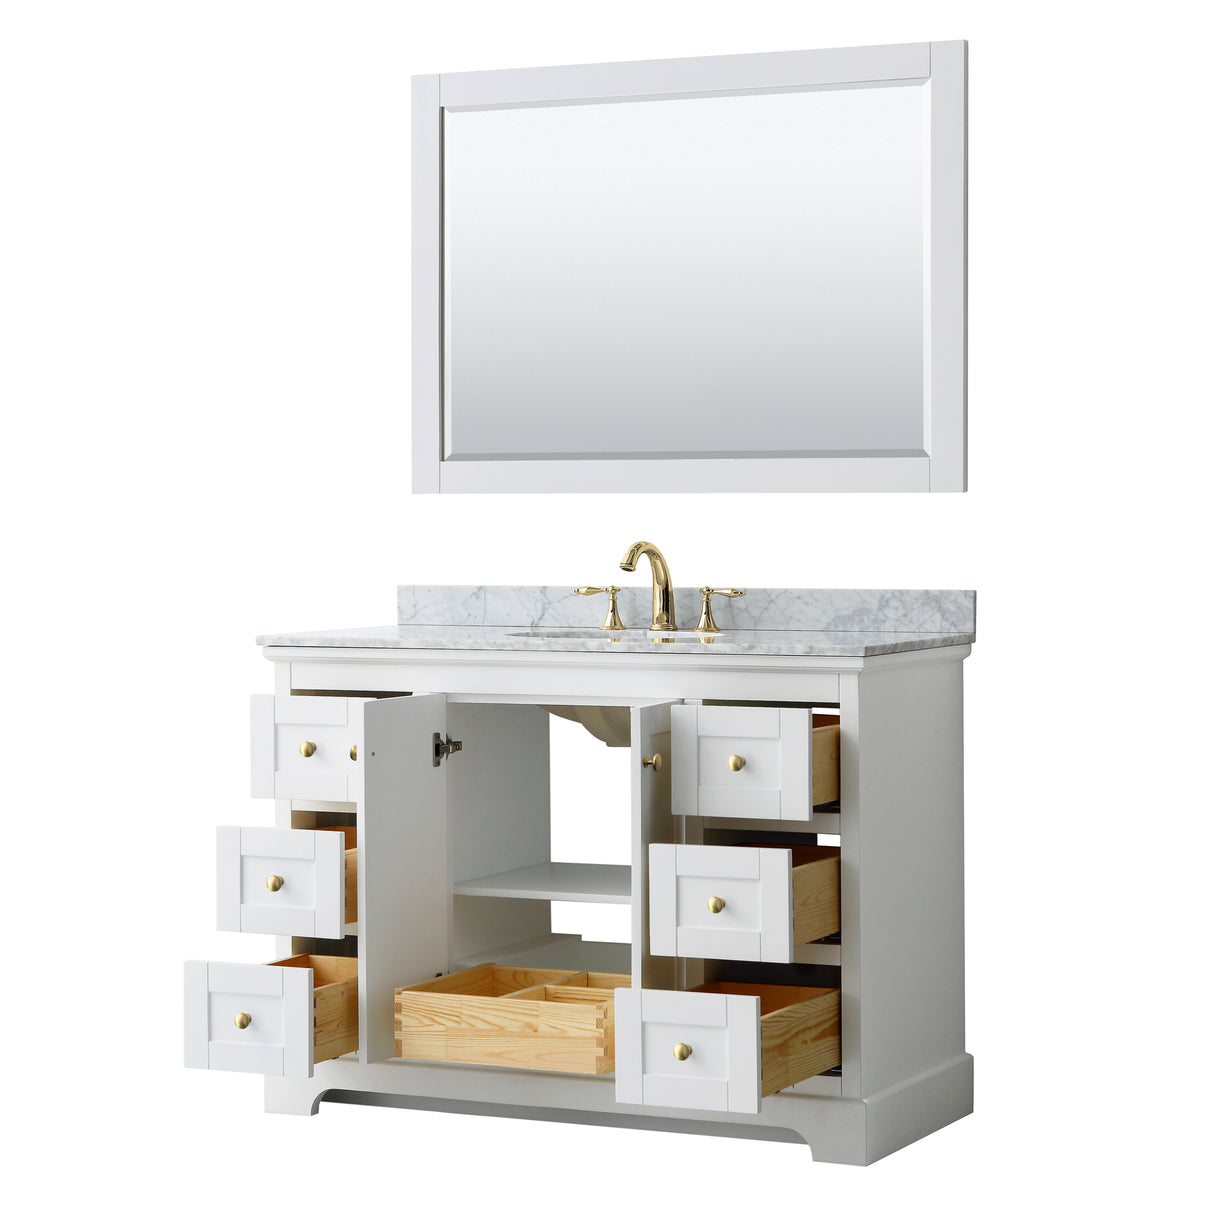 Avery 48 Inch Single Bathroom Vanity in White White Carrara Marble Countertop Undermount Oval Sink 46 Inch Mirror Brushed Gold Trim